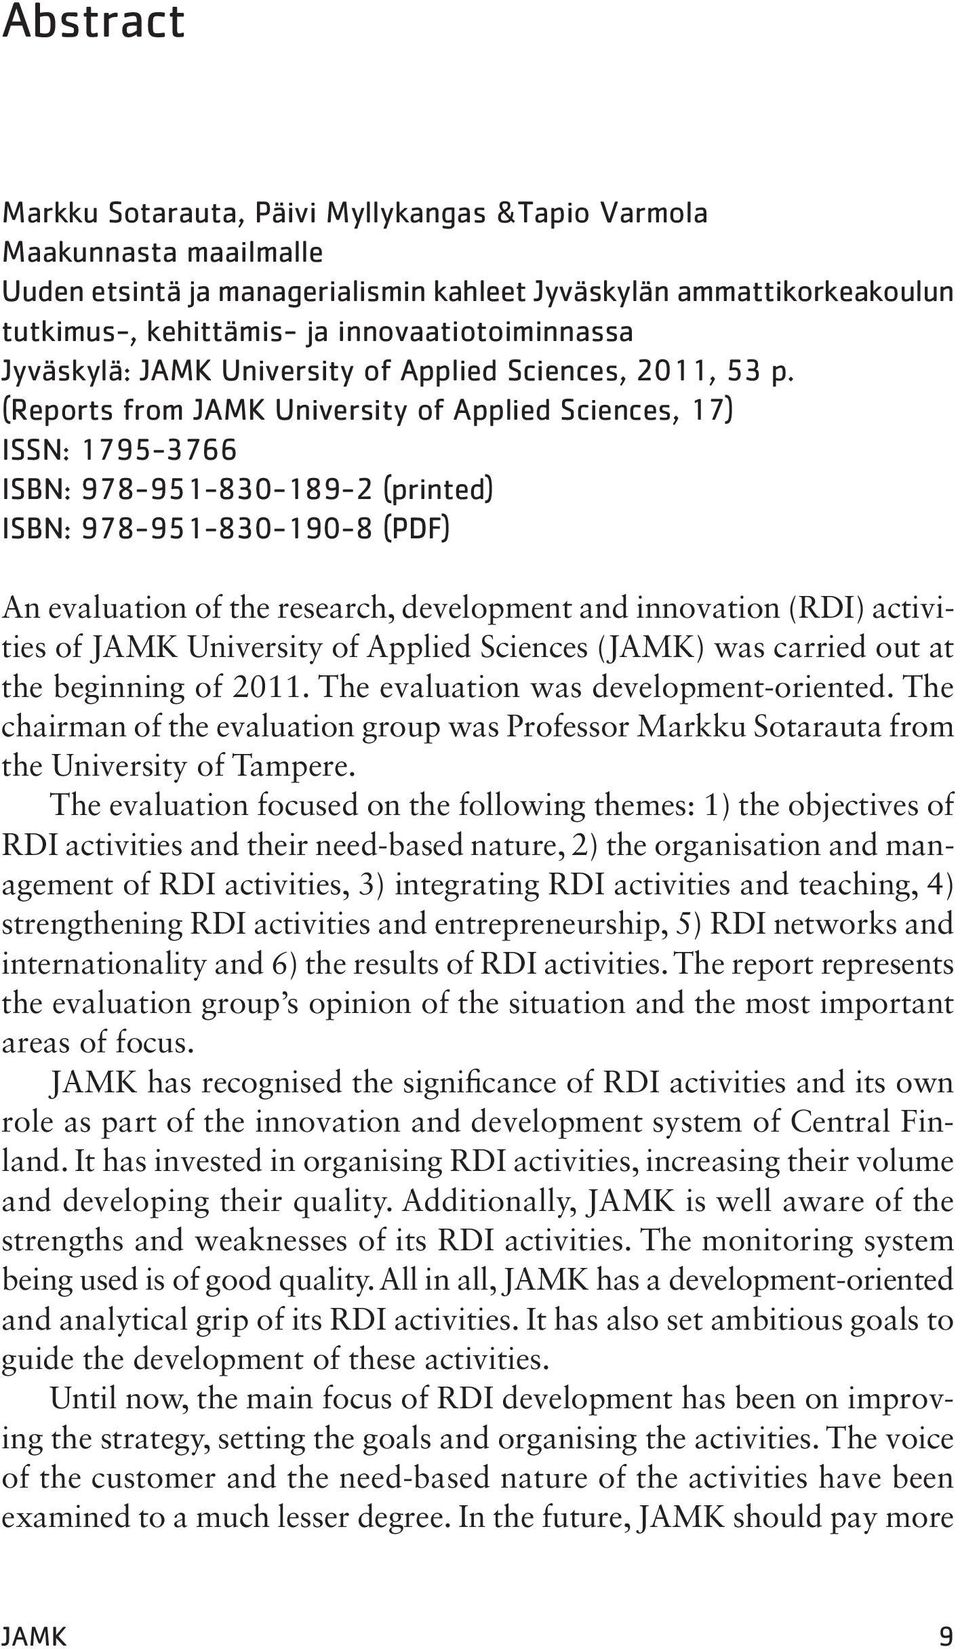 (Reports from JAMK University of Applied Sciences, 17) ISSN: 1795-3766 ISBN: 978-951-830-189-2 (printed) ISBN: 978-951-830-190-8 (PDF) An evaluation of the research, development and innovation (RDI)